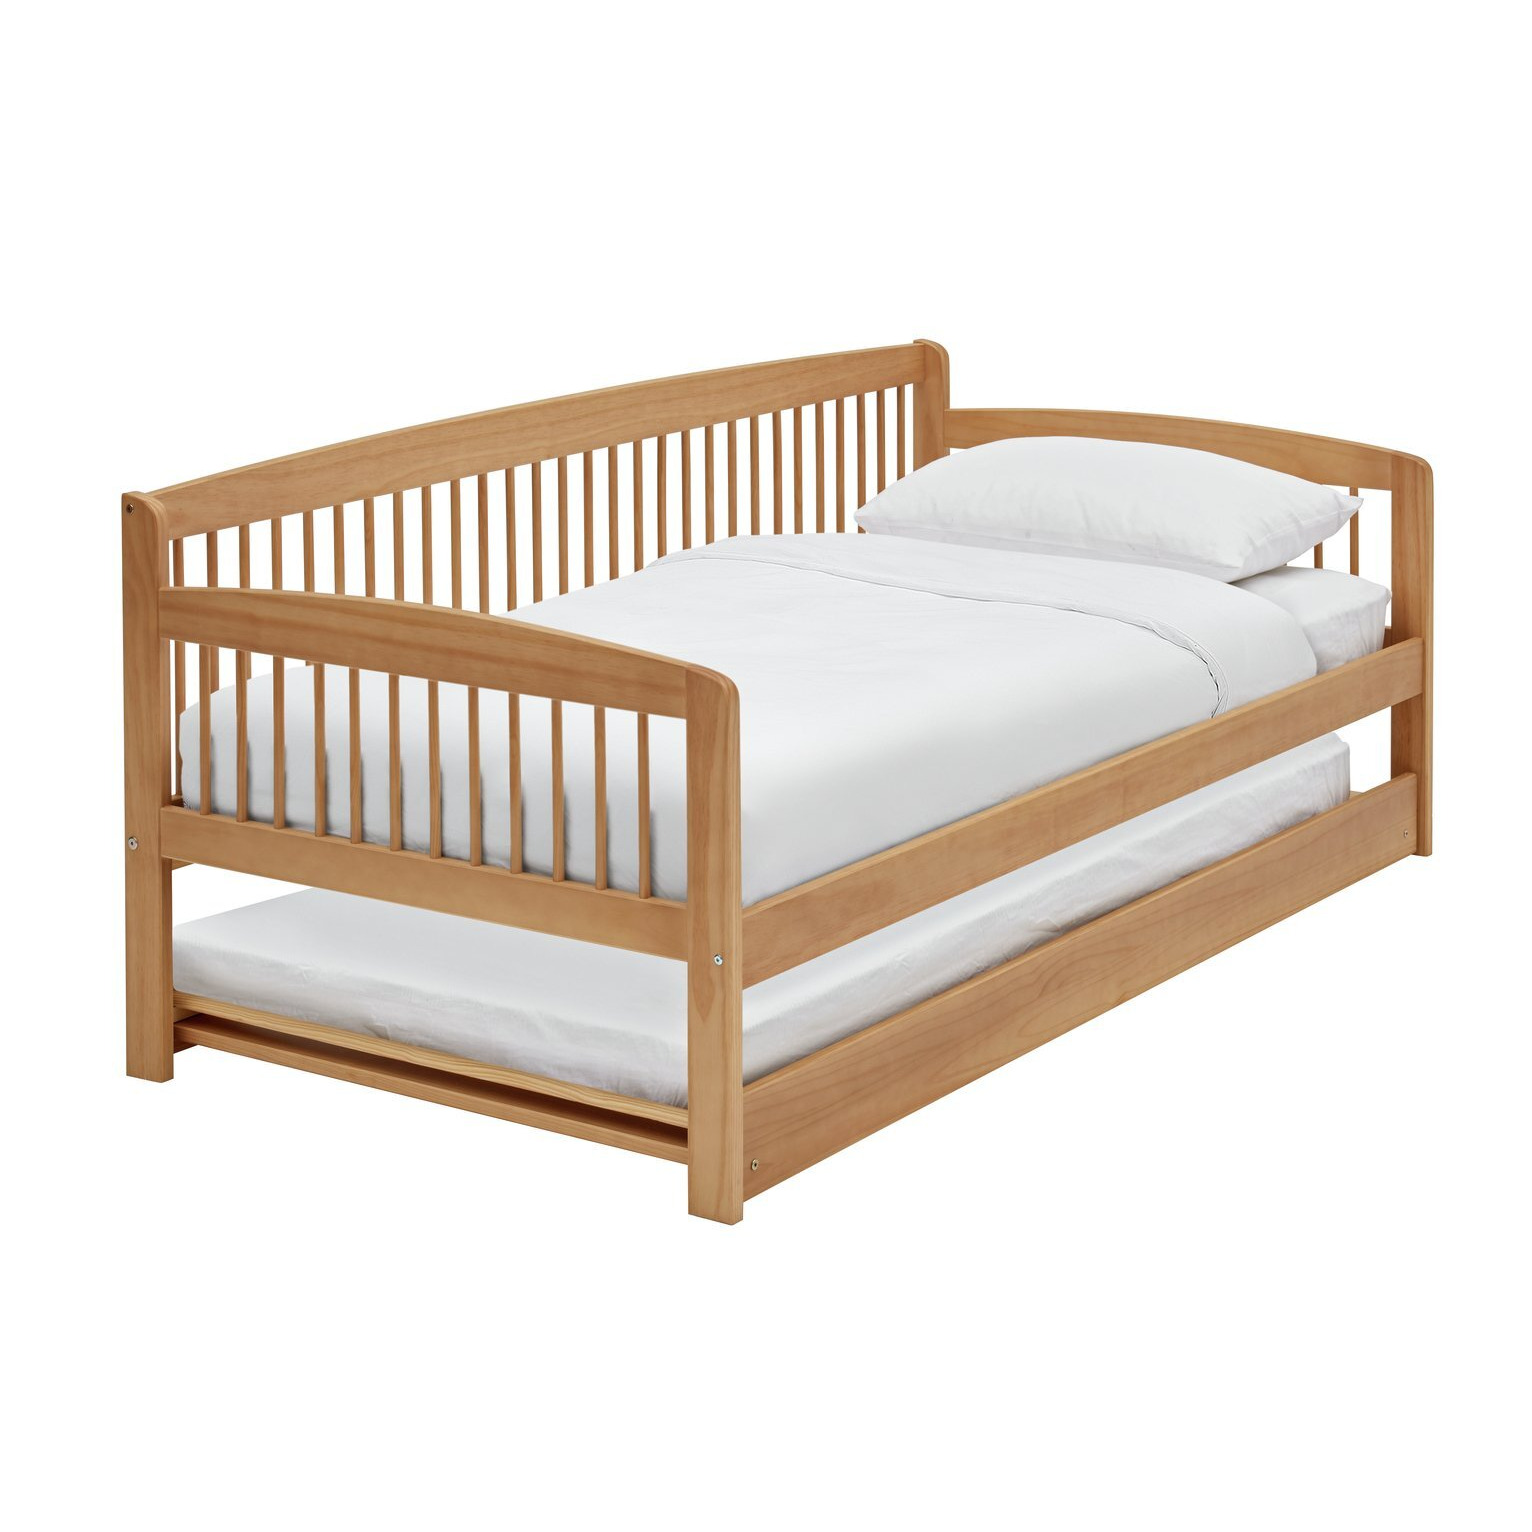 Argos Home Andover Day Bed w/ Trundle & 2 Mattresses - Pine - image 1